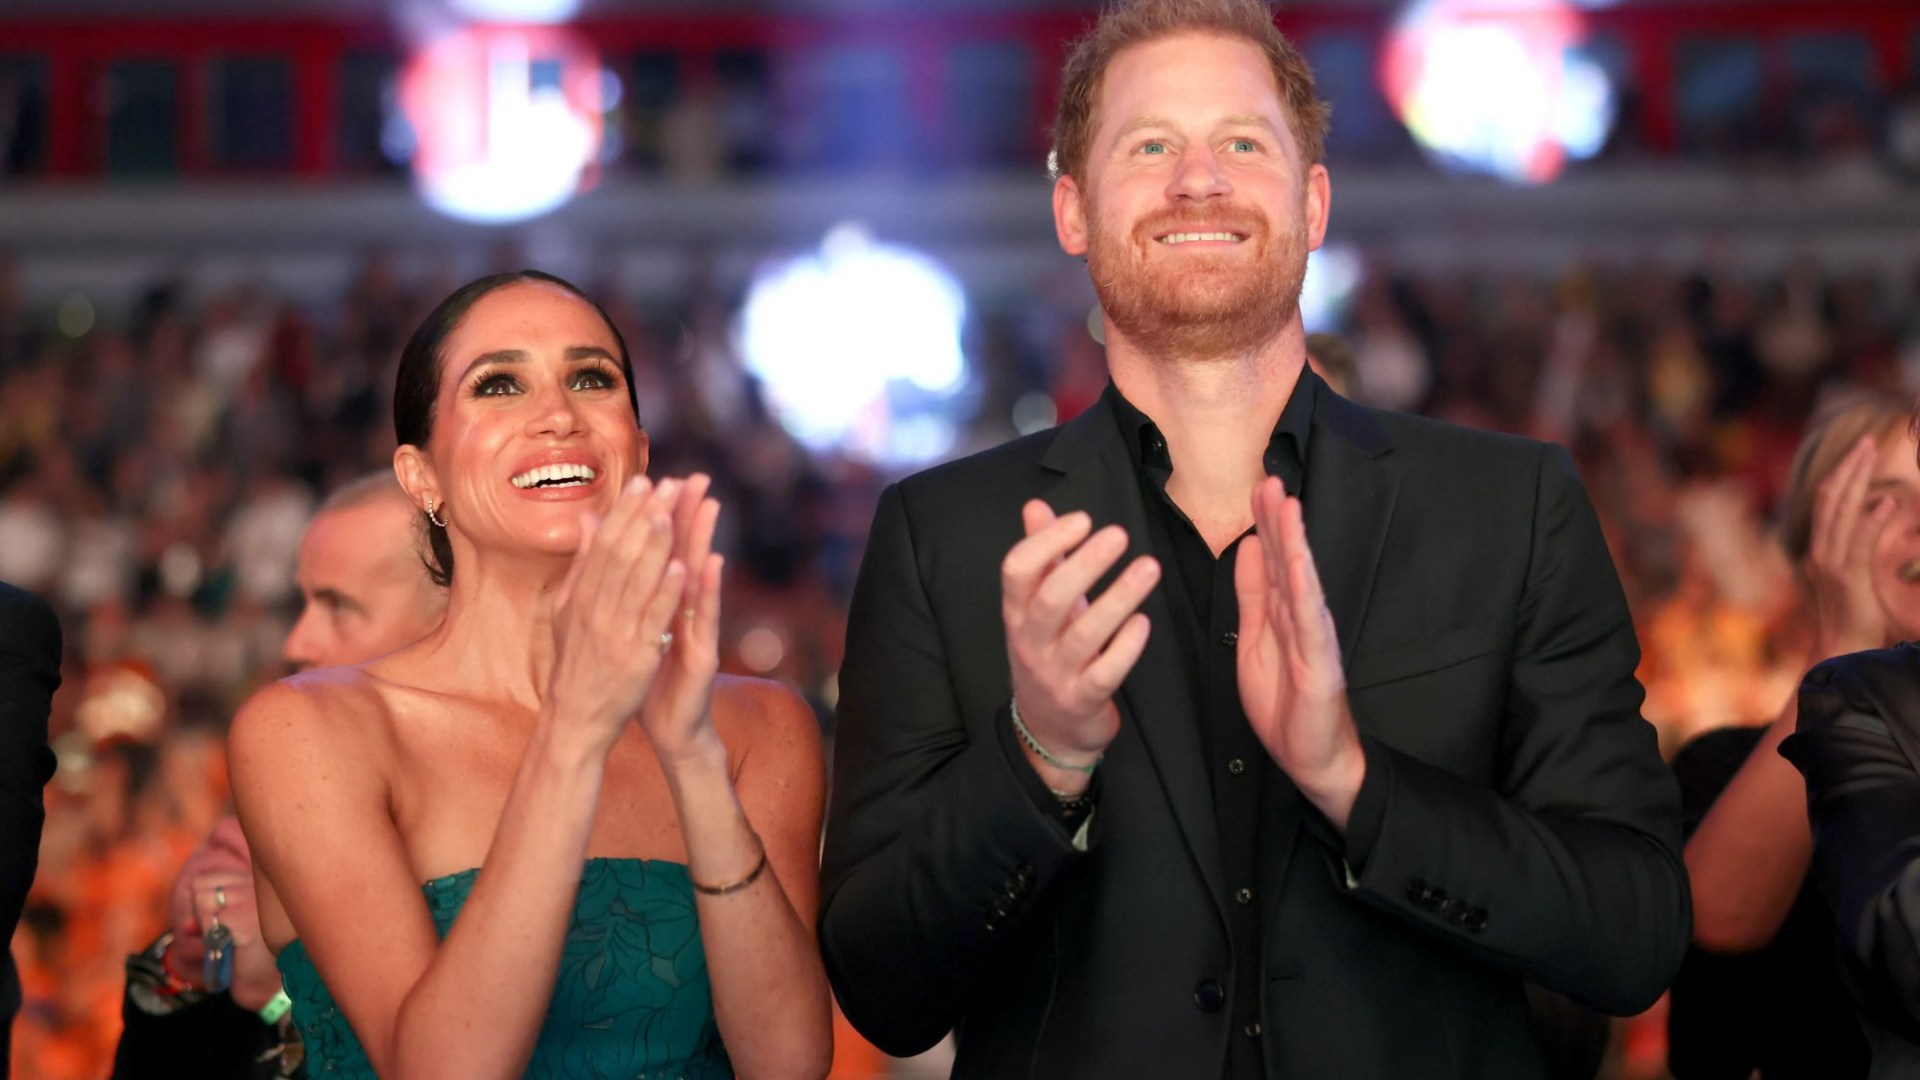 Meghan has ‘failed to find CEO’ for lifestyle brand despite weeks of searching… as filming begins for new Netflix show [Video]